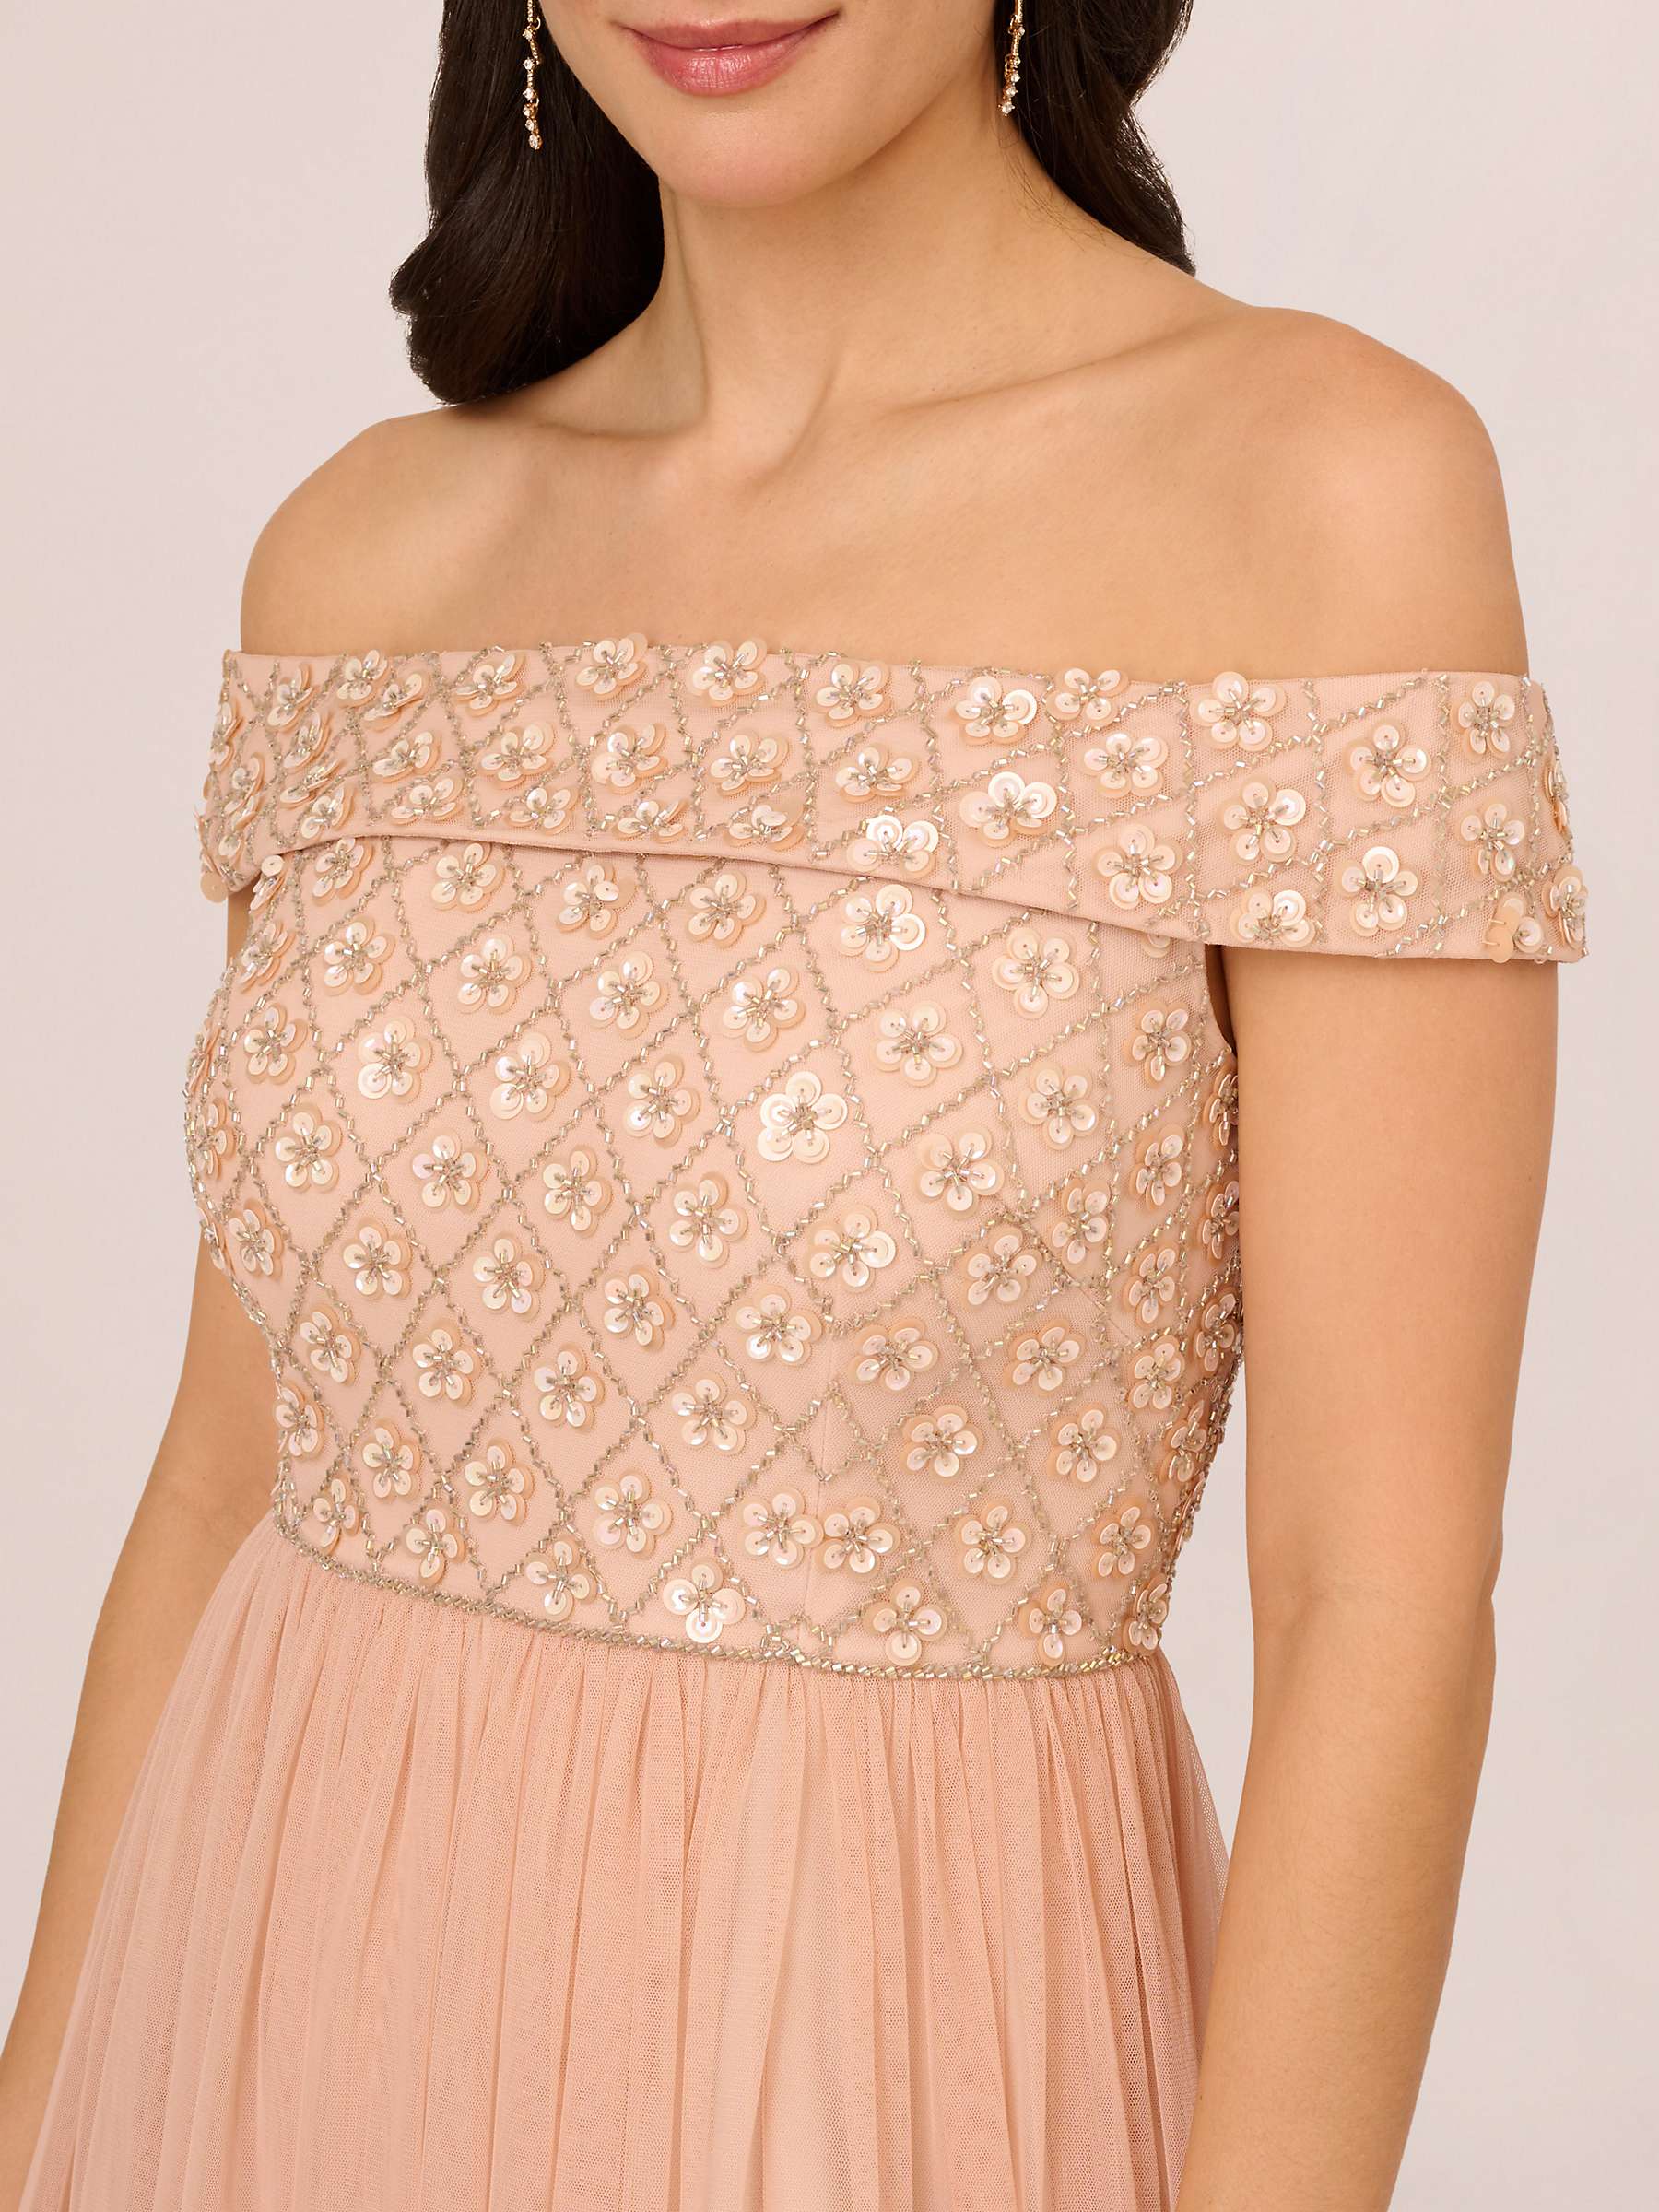 Buy Adrianna Papell Beaded Off The Shoulder Maxi Dress, Blush Online at johnlewis.com